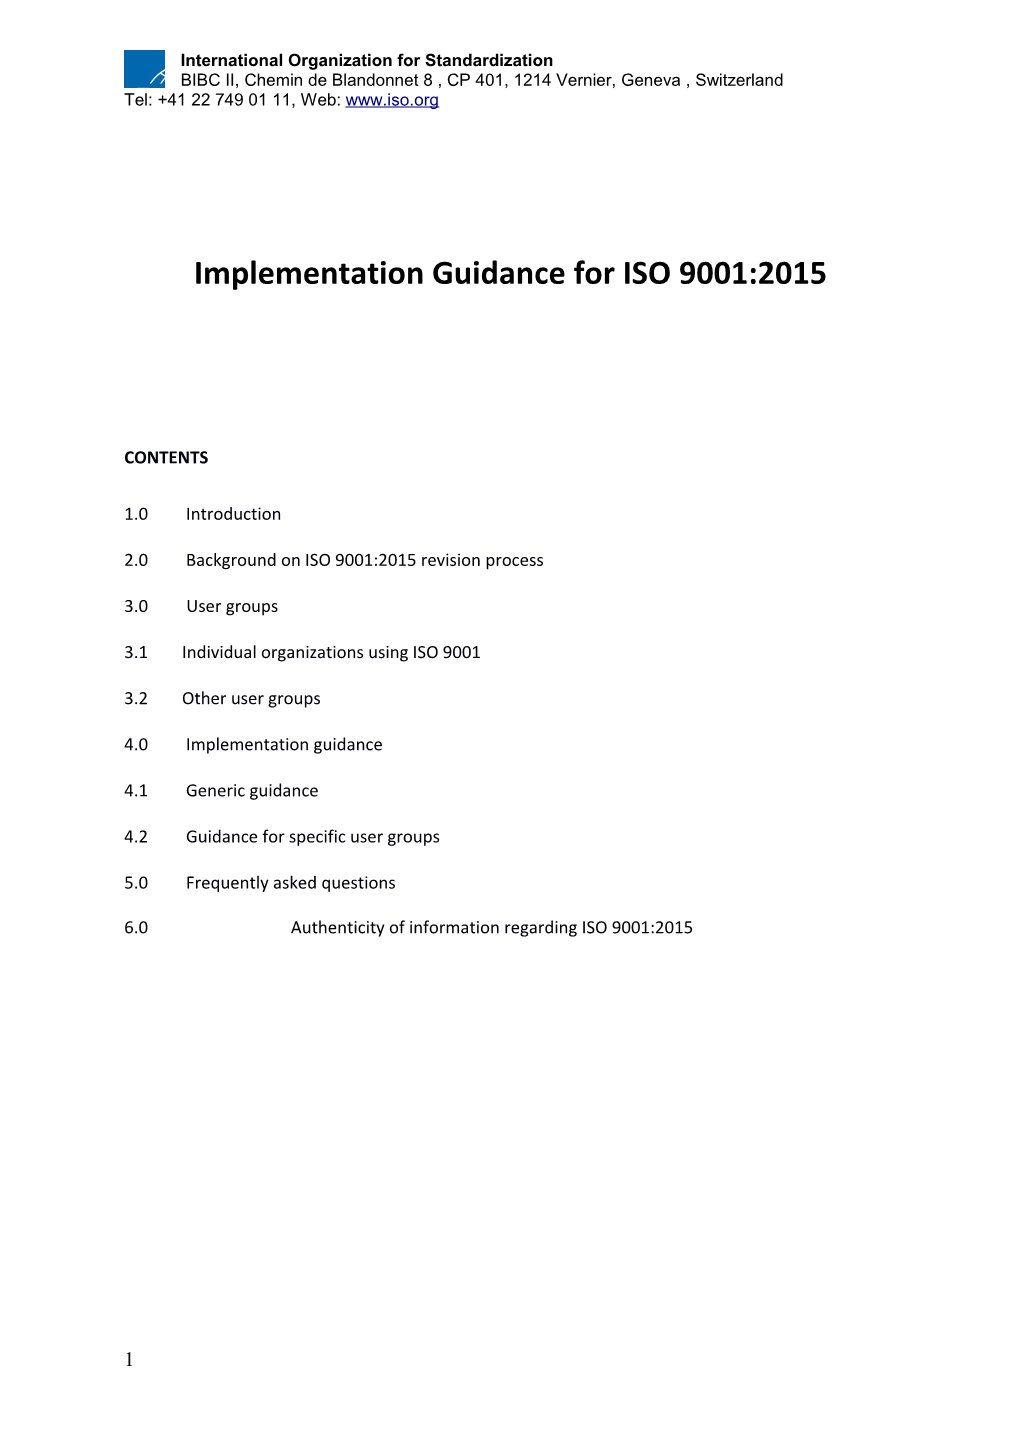 2.0 Background on ISO 9001:2015 Revision Process